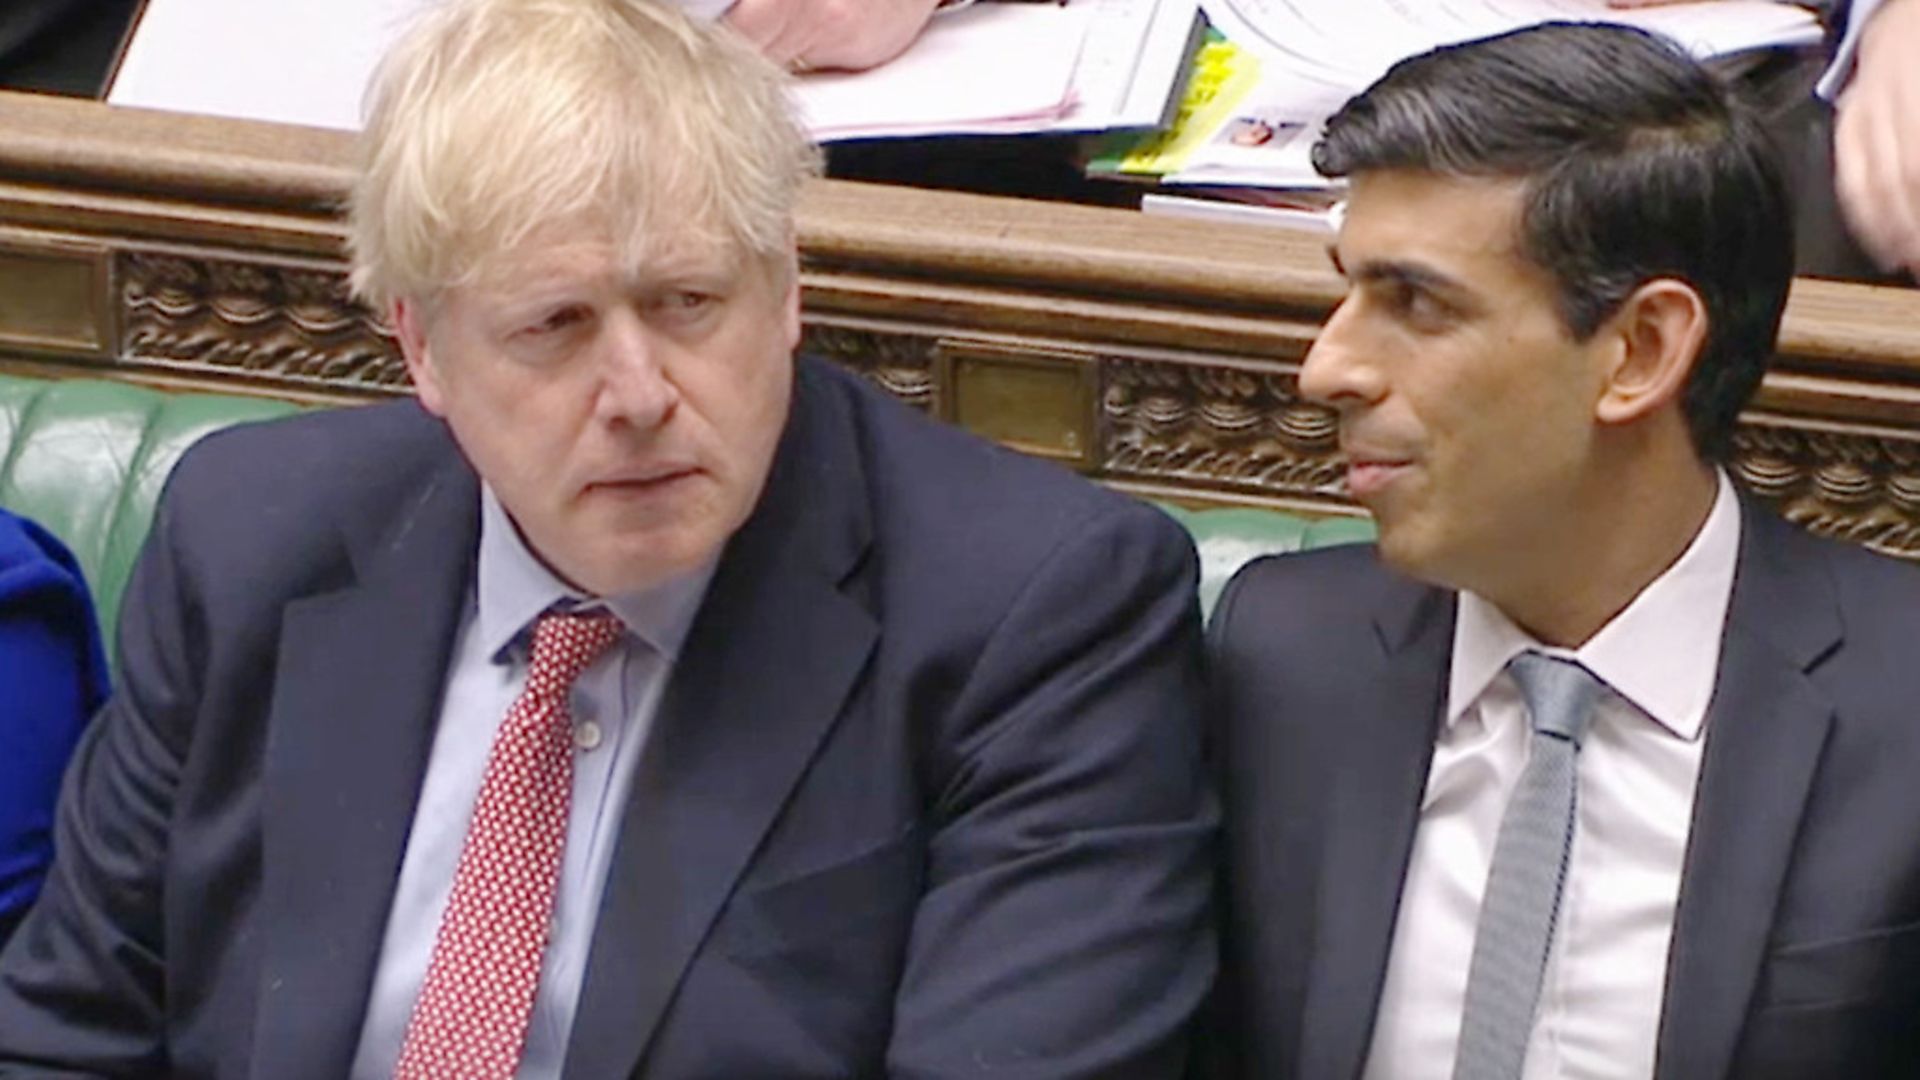 Prime Minister Boris Johnson (left) alongside Chancellor Rishi Sunak during Prime Minister's Questions in the House of Commons. Photograph: House of Commons/PA Wire. - Credit: PA